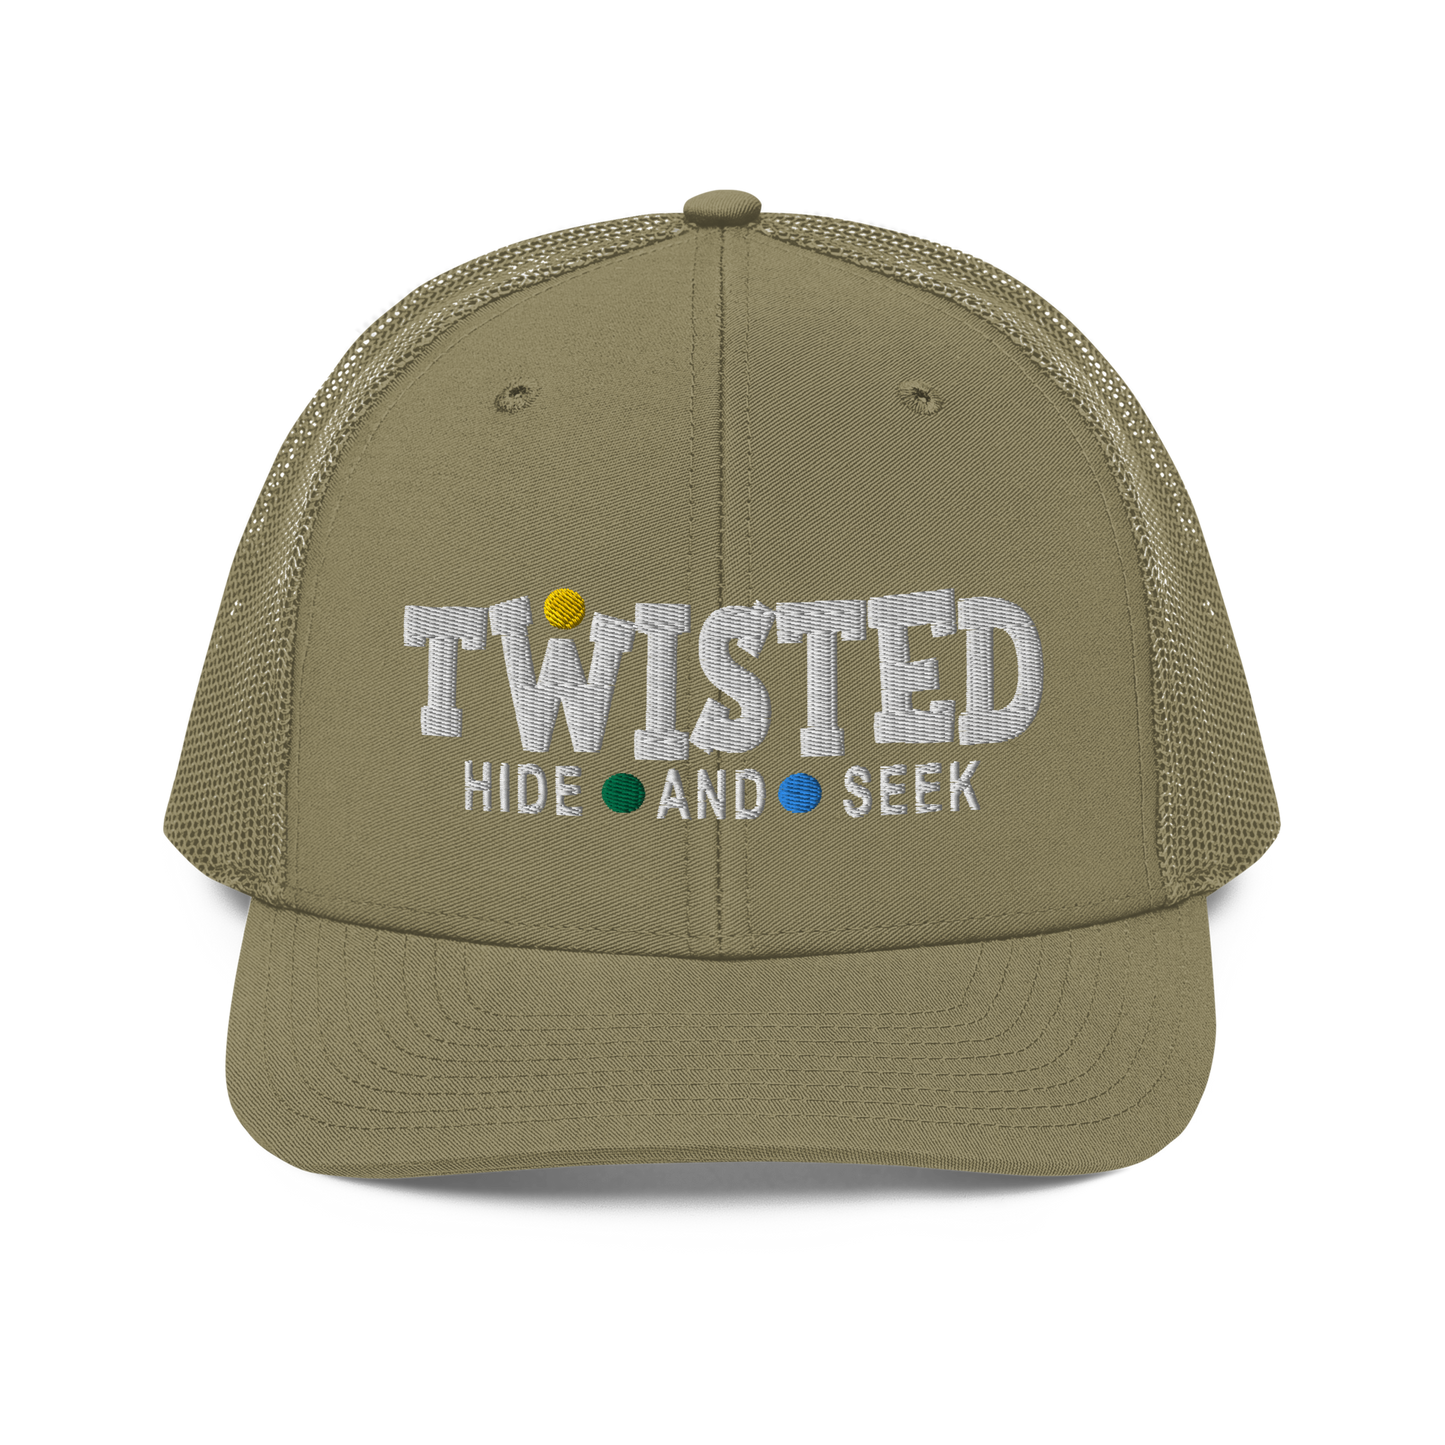 Twisted Hide And Seel | Snapback Trucker Cap | Richardson 112